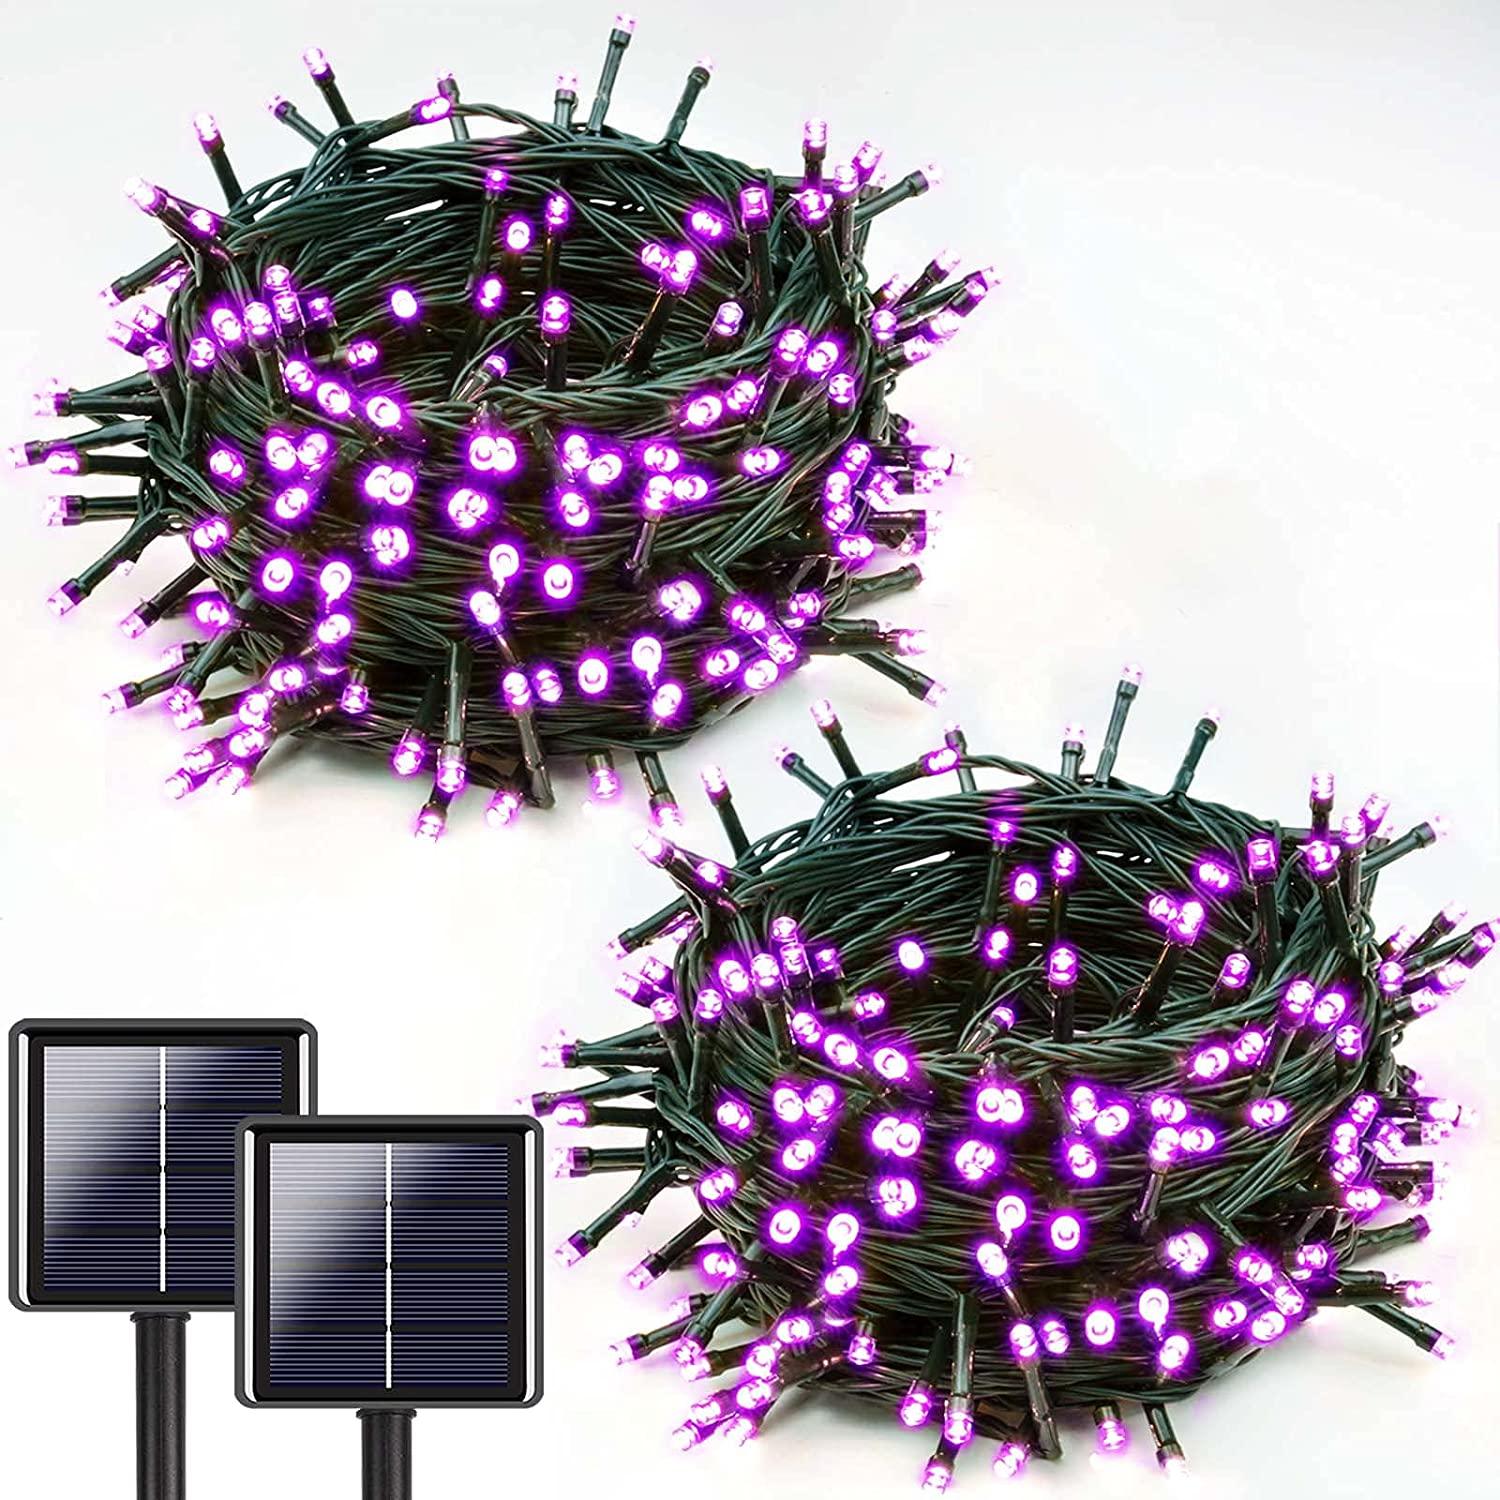 72ft 200 LED Solar String Lights Outdoor, Bright Outdoor Decorative Waterproof 8 Modes Solar Tree Lights for Garden Patio Party Halloween Decorations - If you say i do